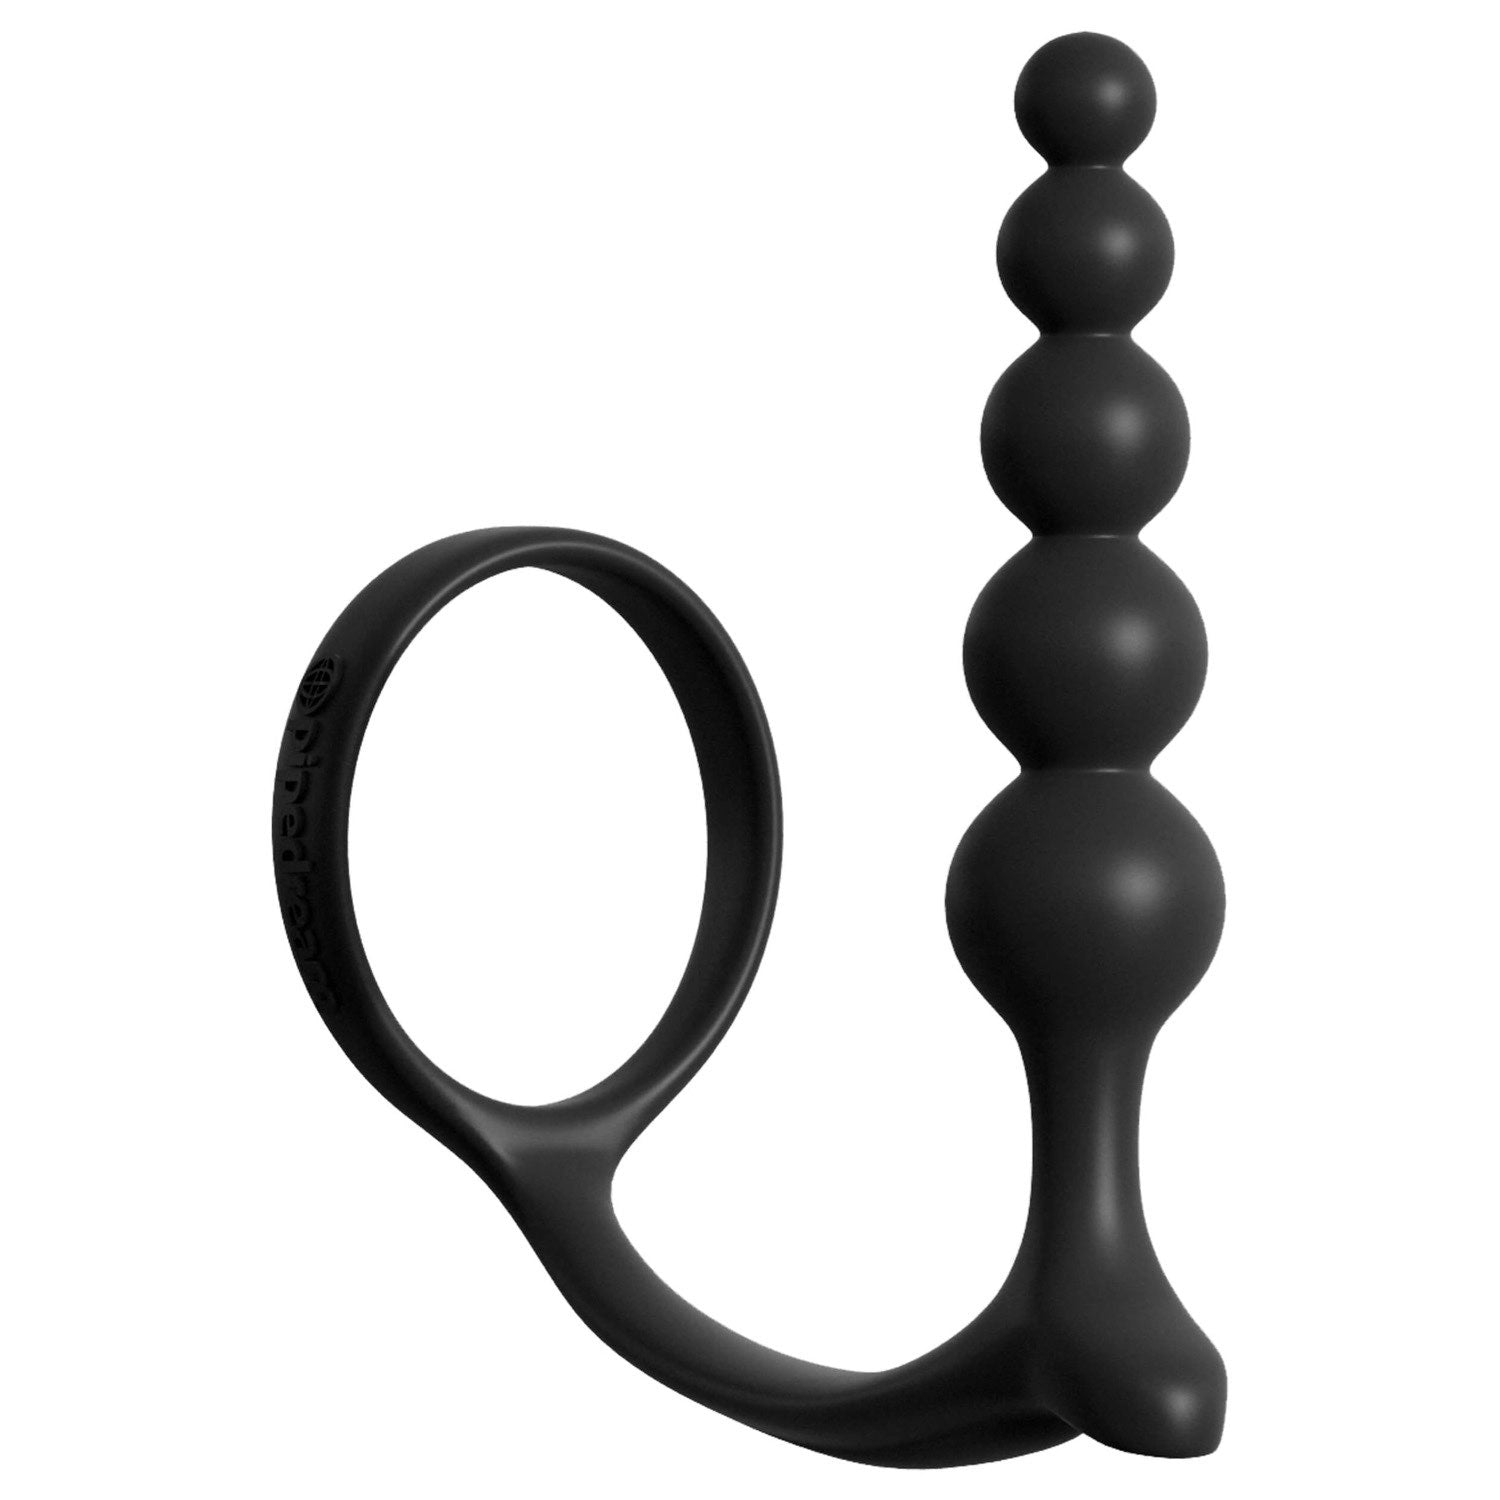 Fetish Fantasy Elite Ball Cinch With Anal Bead - Black Ball Ring with Anal Bead by Pipedream